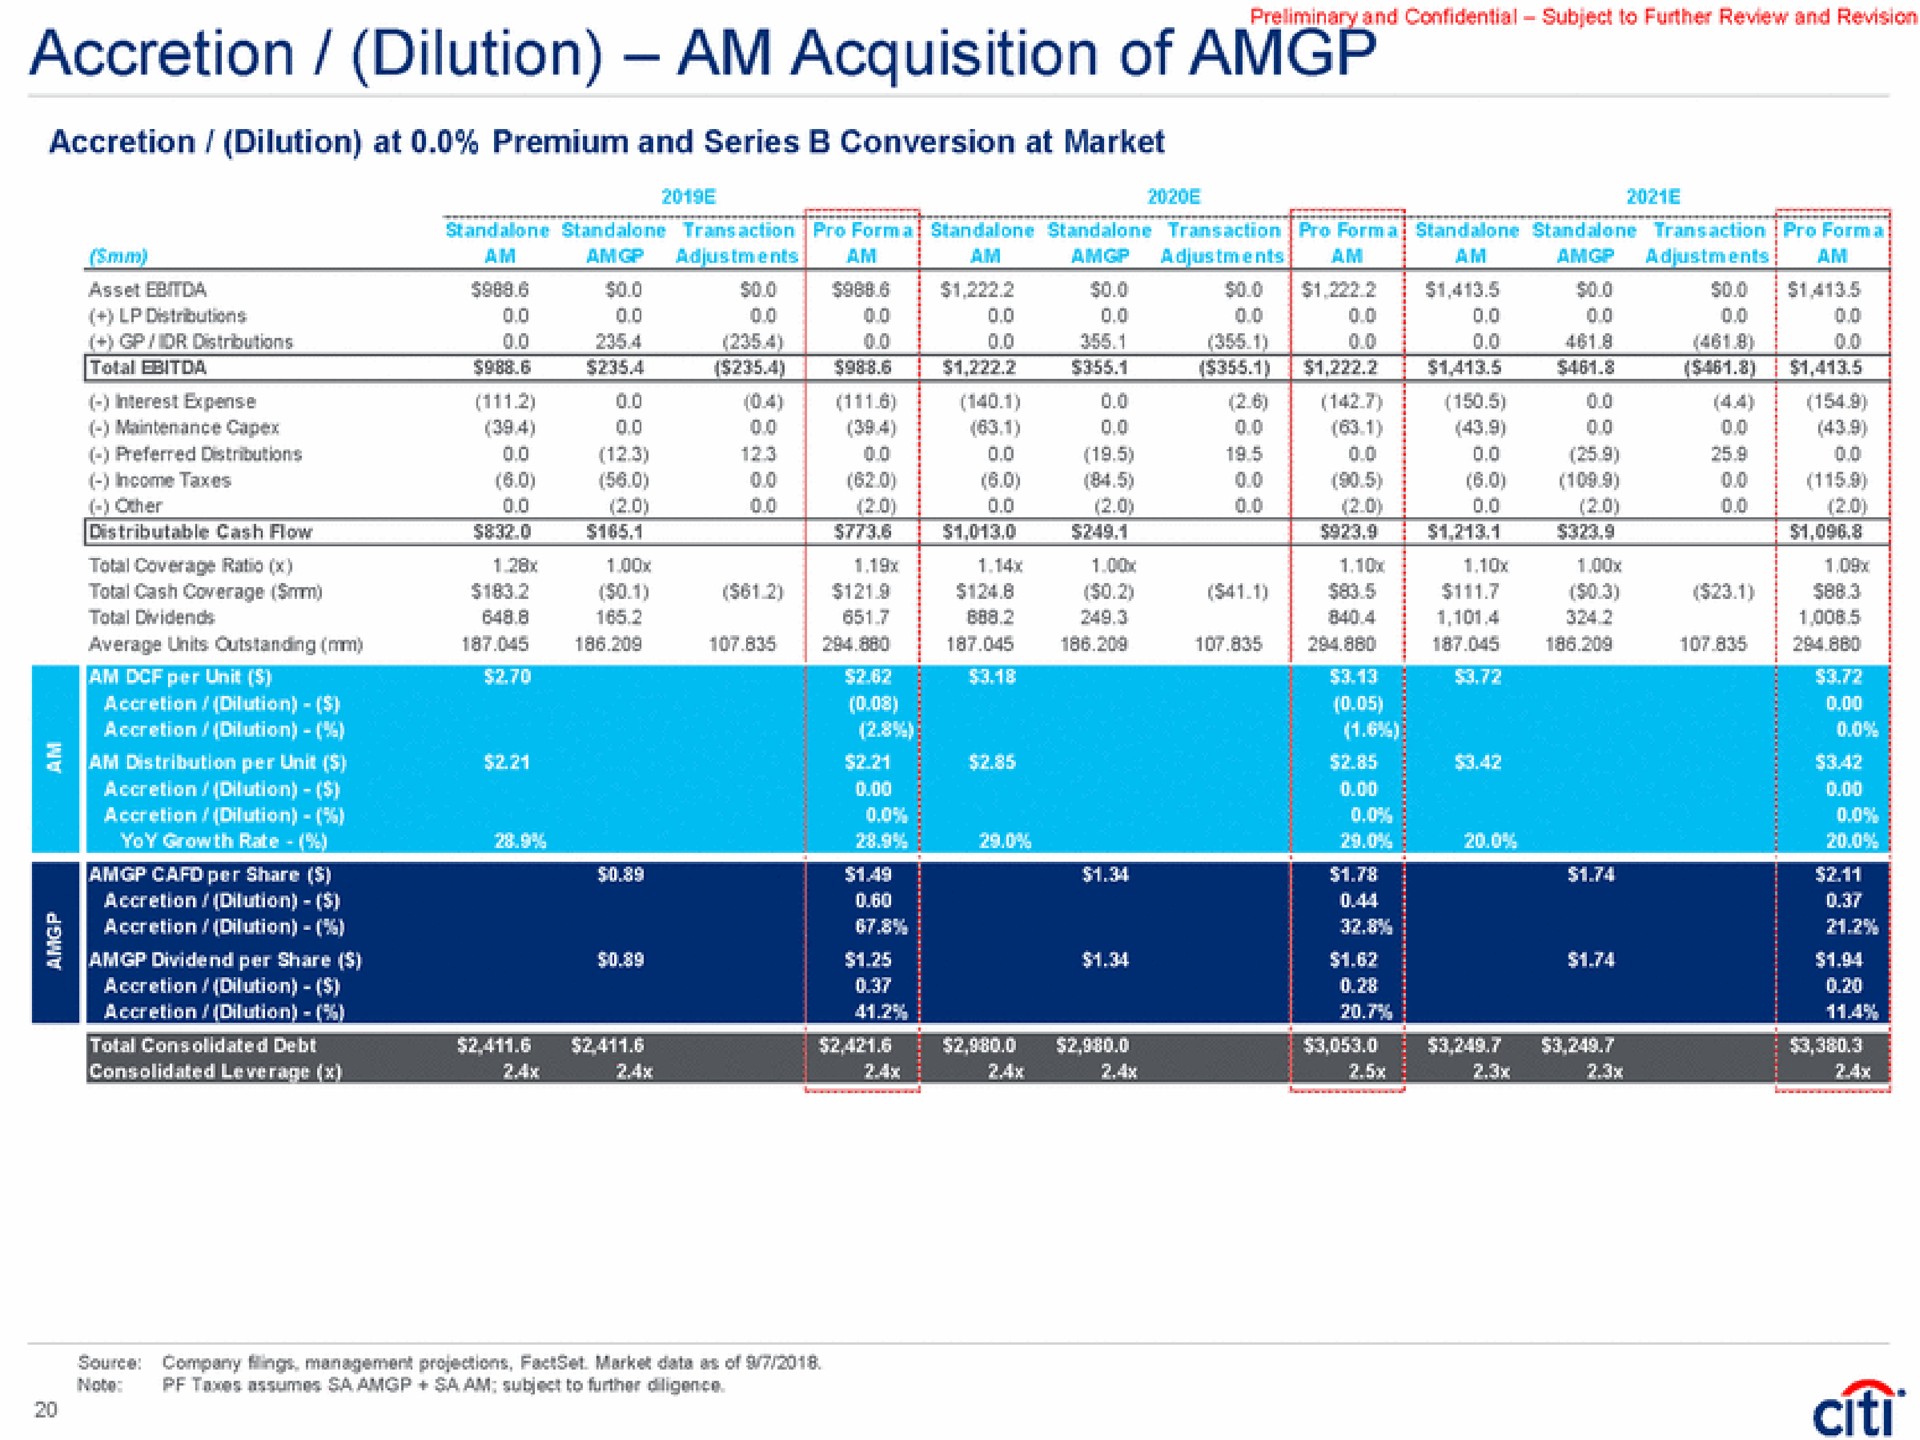 accretion dilution at premium and series conversion at market | Citi